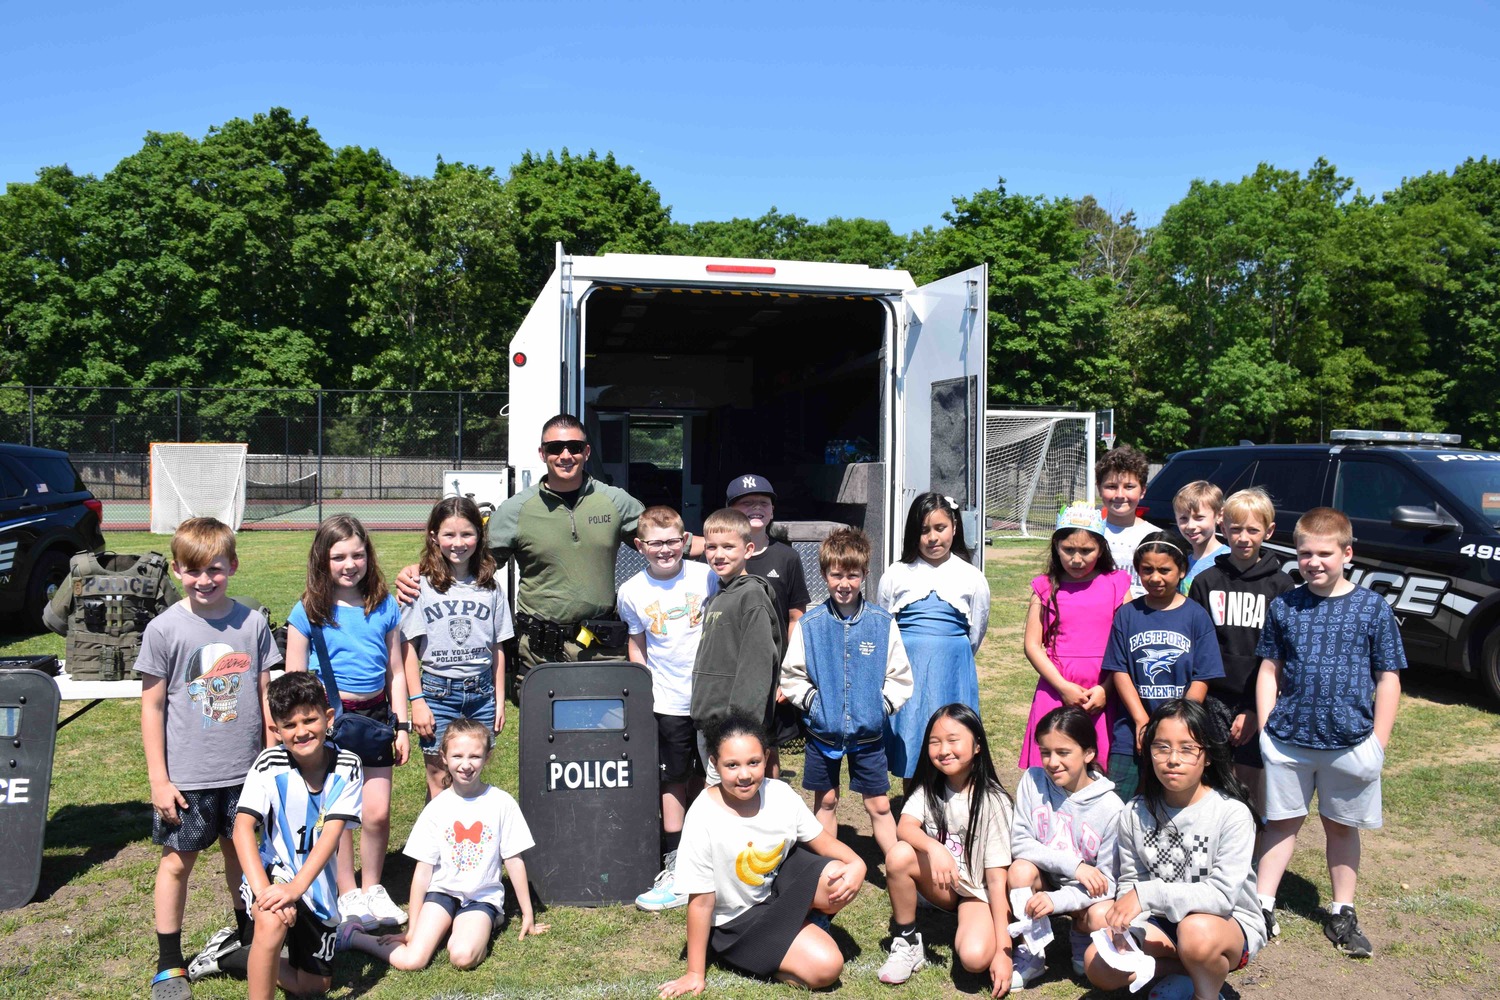 Southampton Town Police Department Emergency Services Officer Chris Manzello with Eastport-South Manor students, during the district's recent Police Day event, during which students learned about law enforcement and emergency services from local agencies. COURTESY EASTPORT-SOUTH MANOR SCHOOL DISTRICT